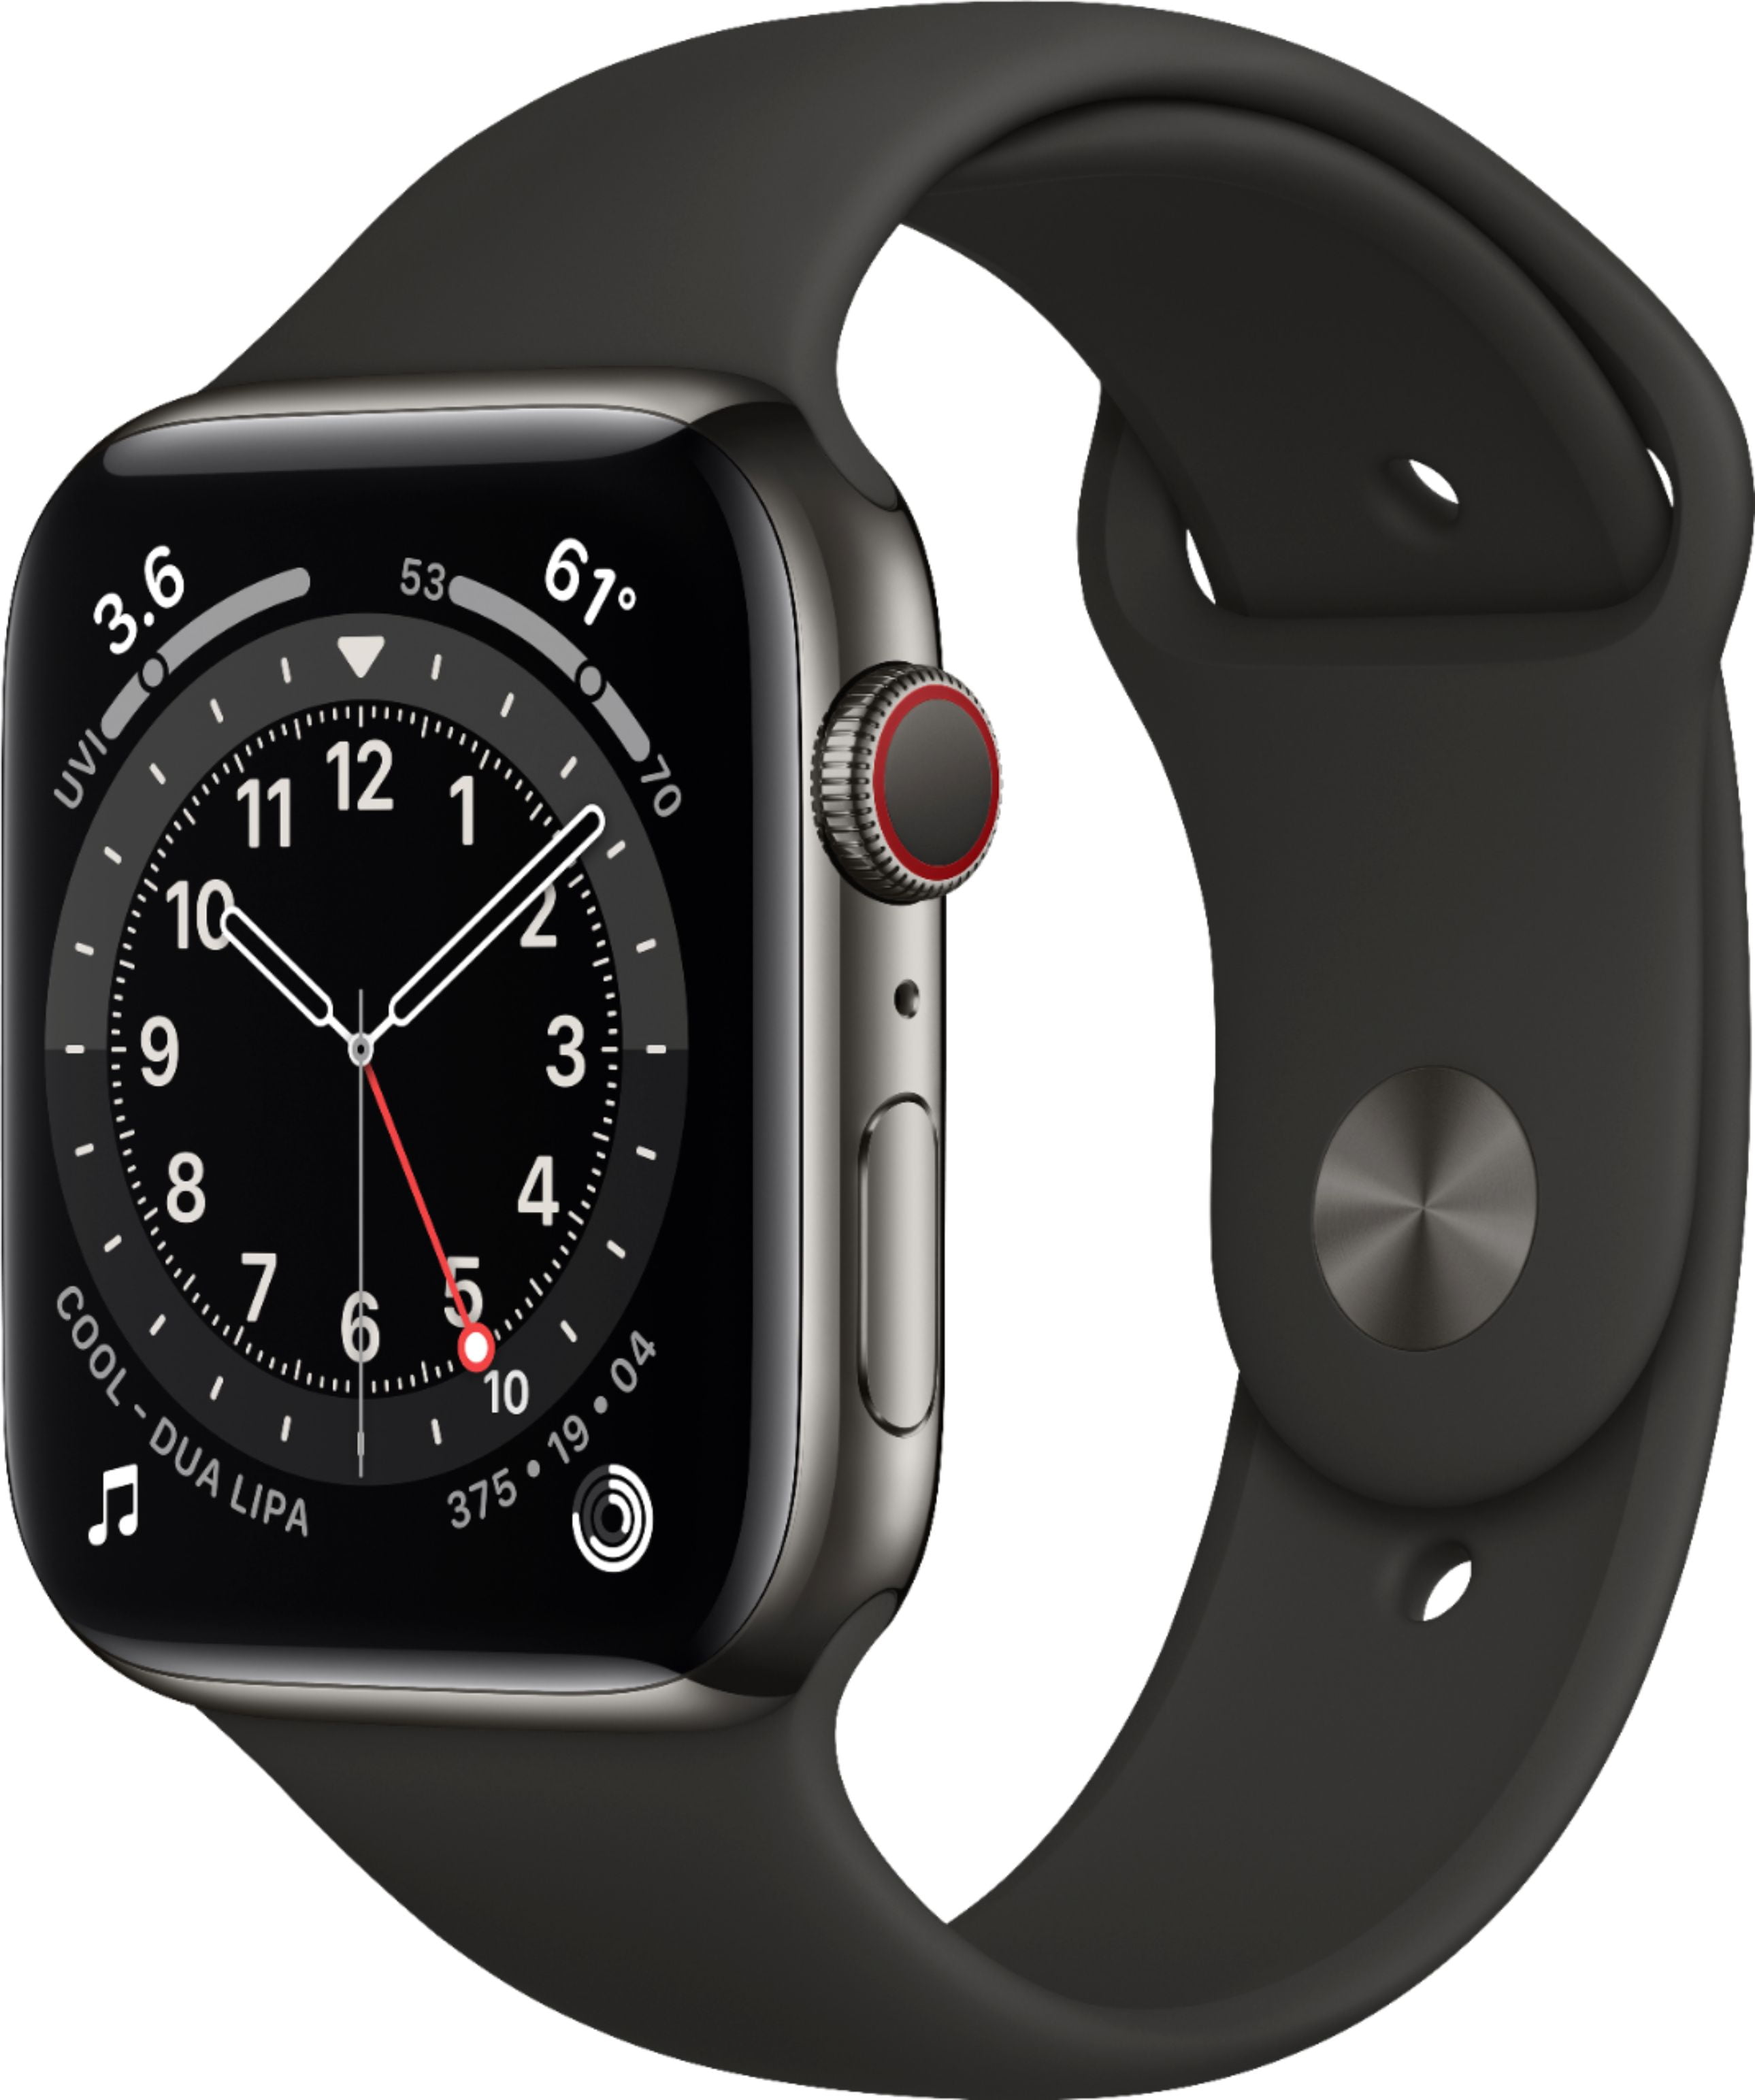 Refurbished Apple Watch Gen 6 Series 6 Cell 44mm Graphite Stainless Apple Series 6 Stainless Steel